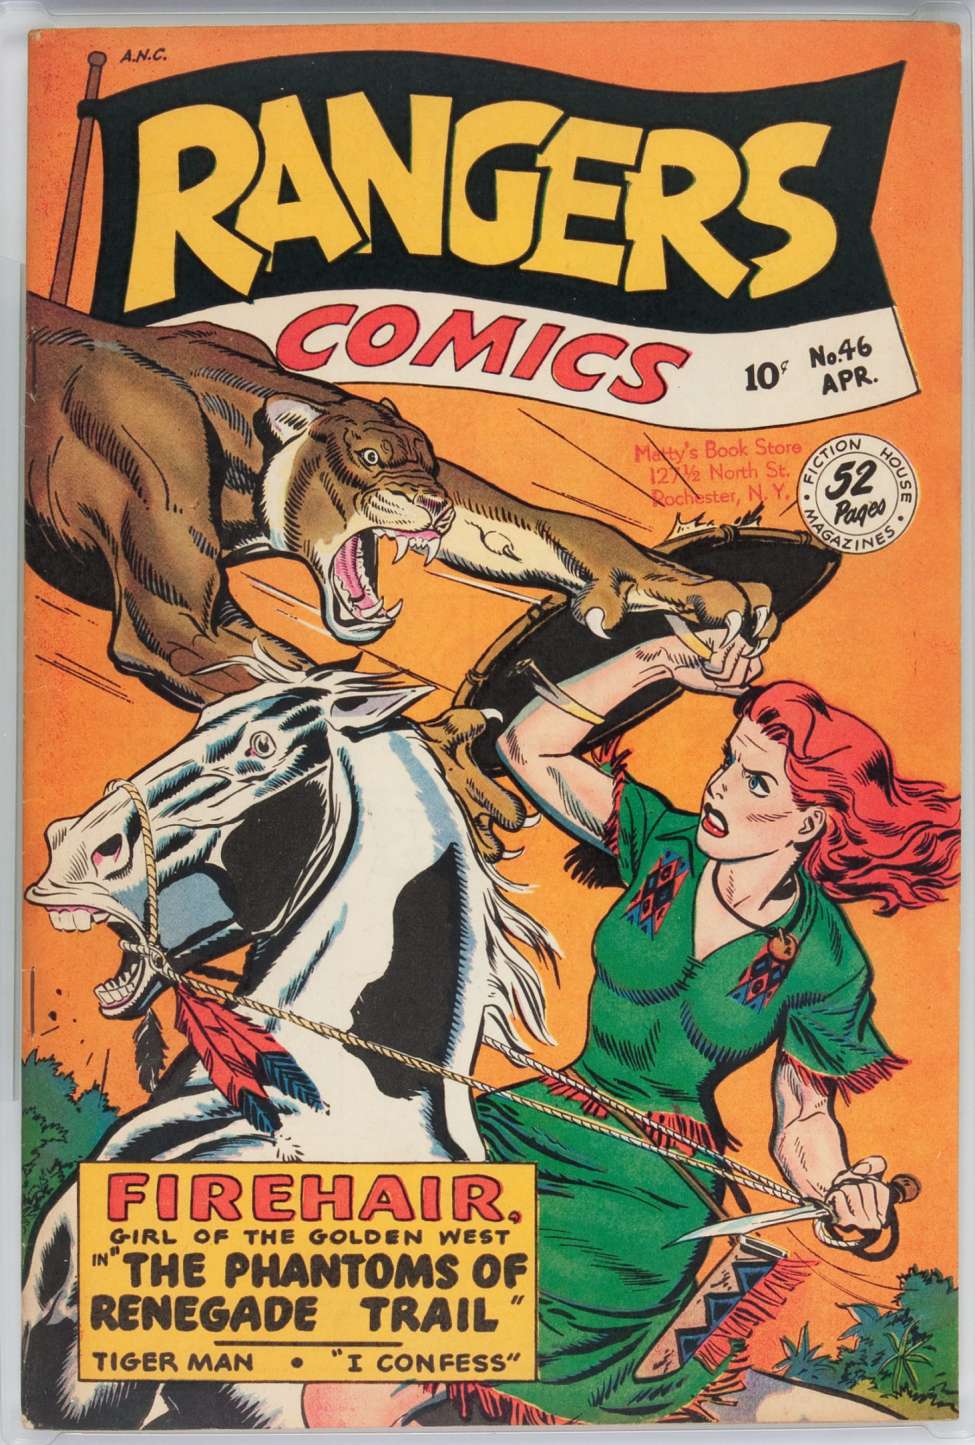 Book Cover For Rangers Comics 46